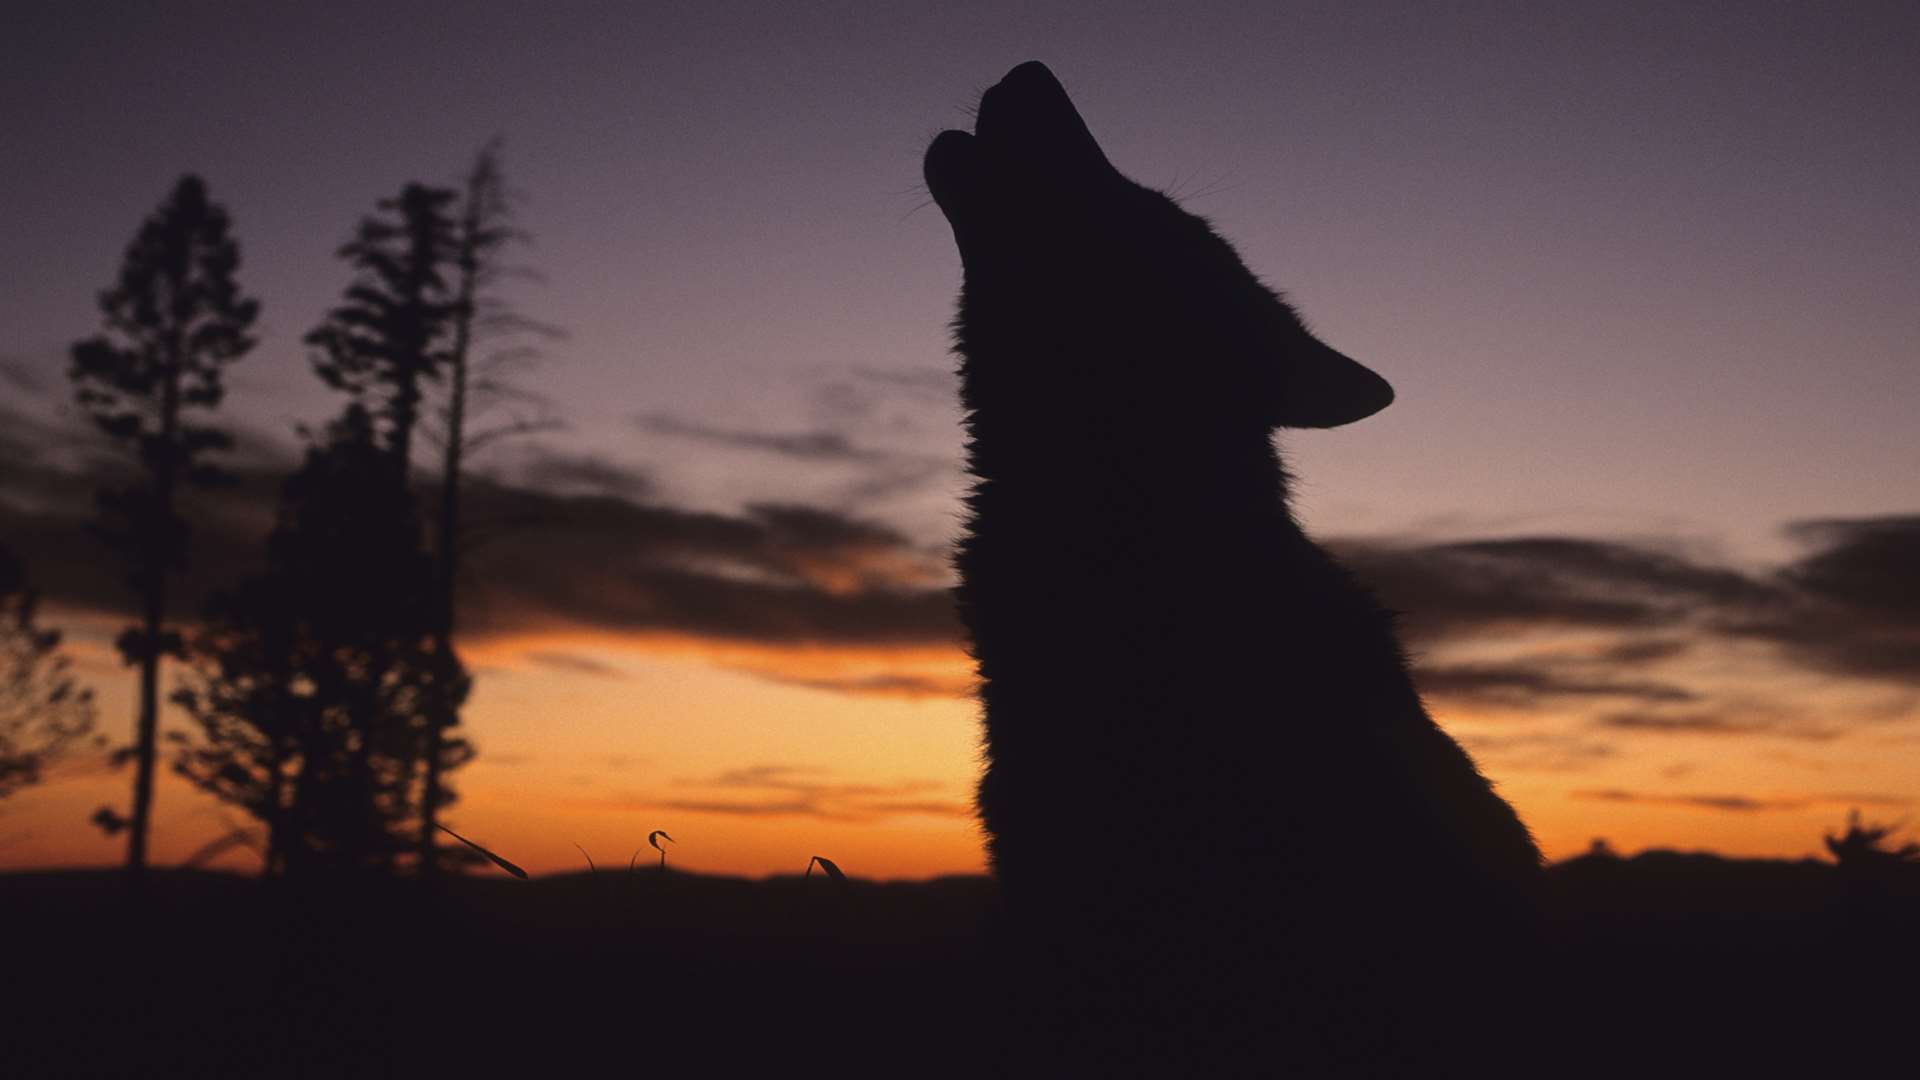 A howling animal. Stock image.